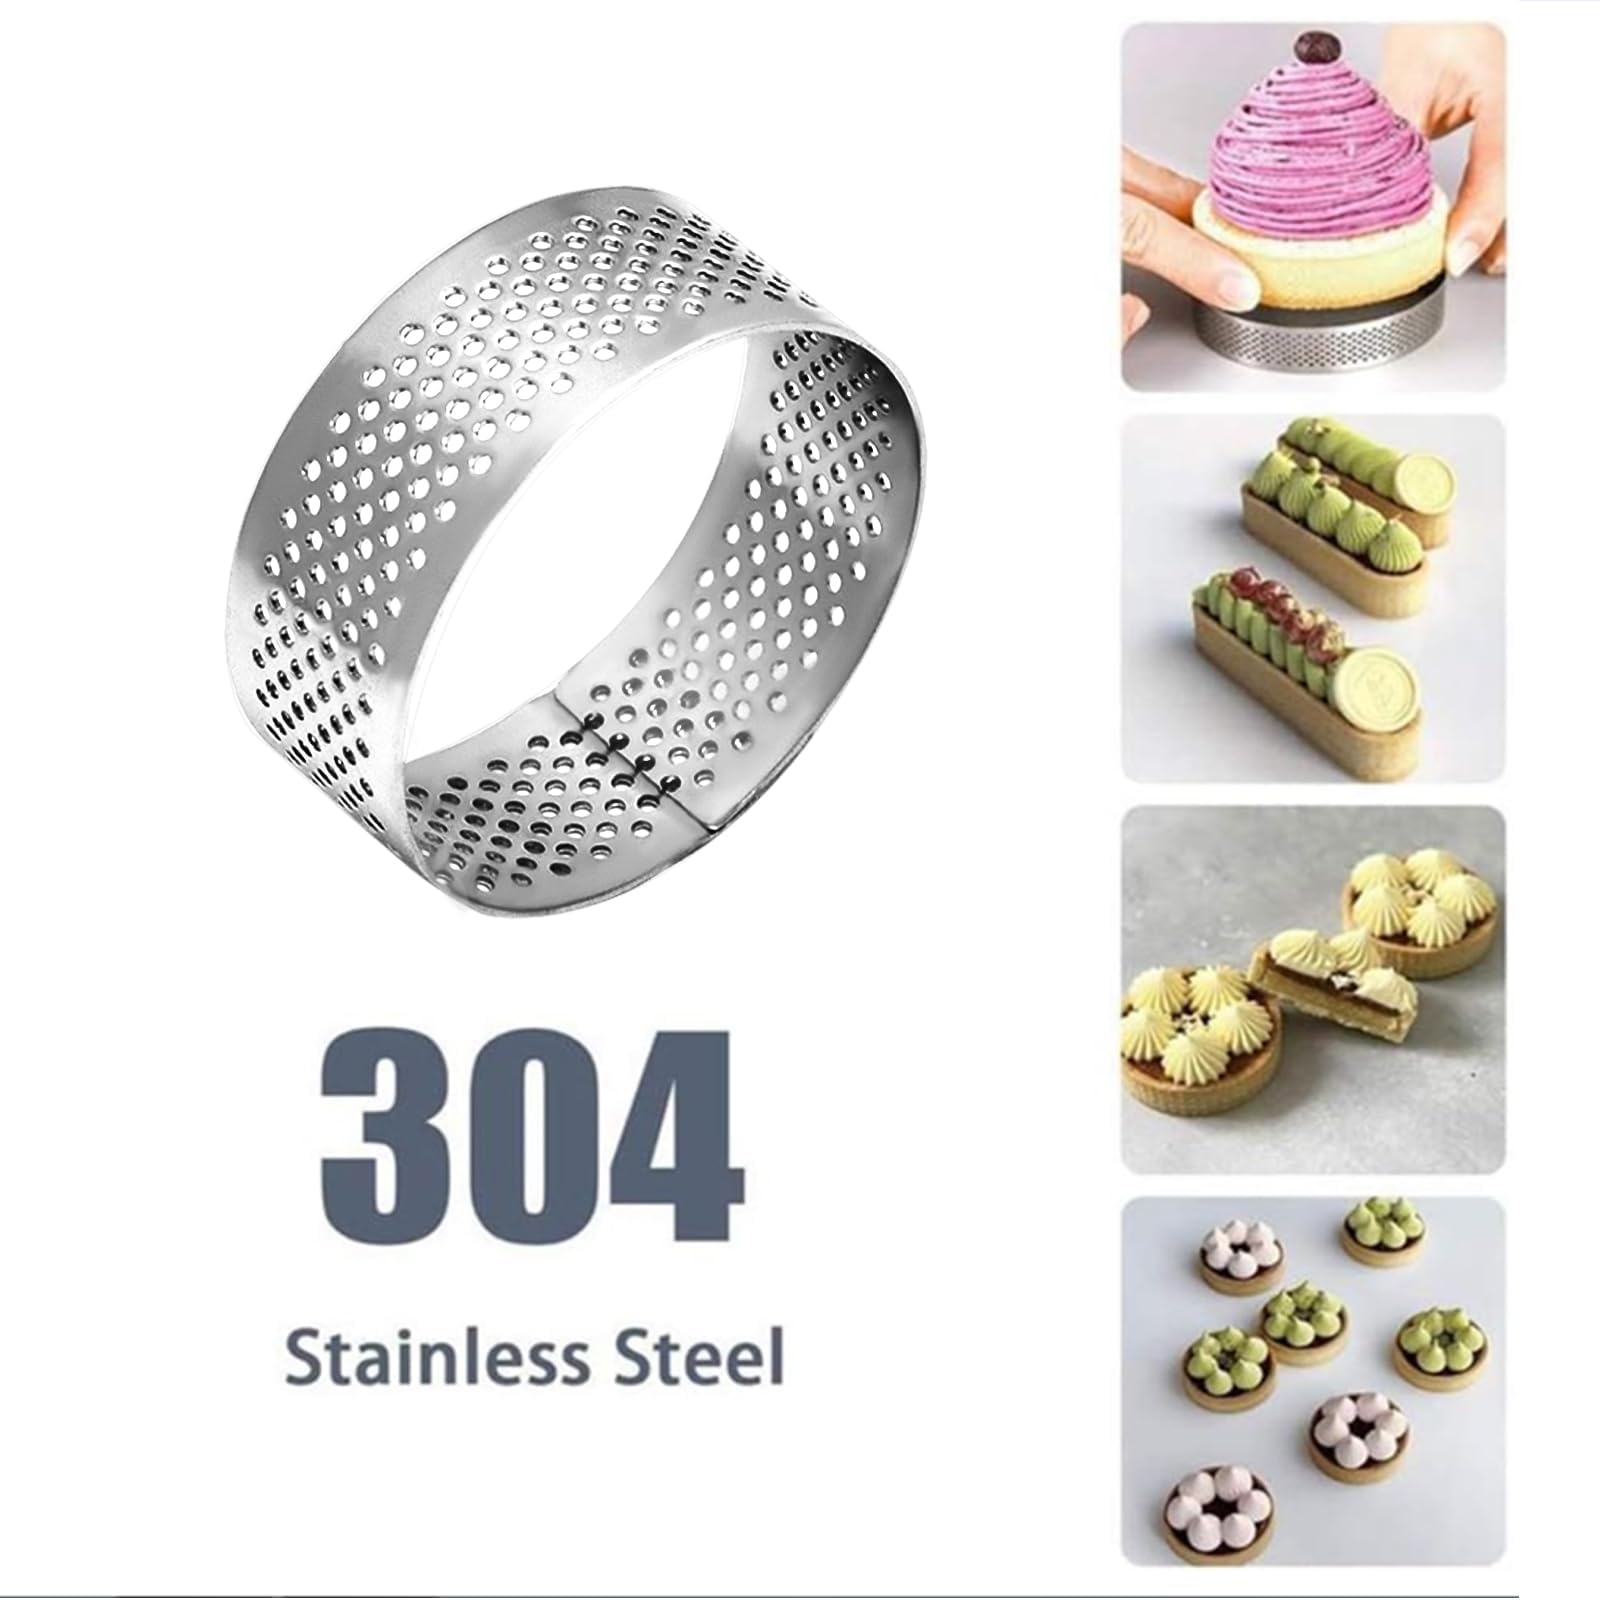 10 Pcs 1.98 Inch Stainless Steel Tart Ring, Heat-Resistant Perforated Cake Mousse Ring, Round Ring Baking doughnut tools 5cm